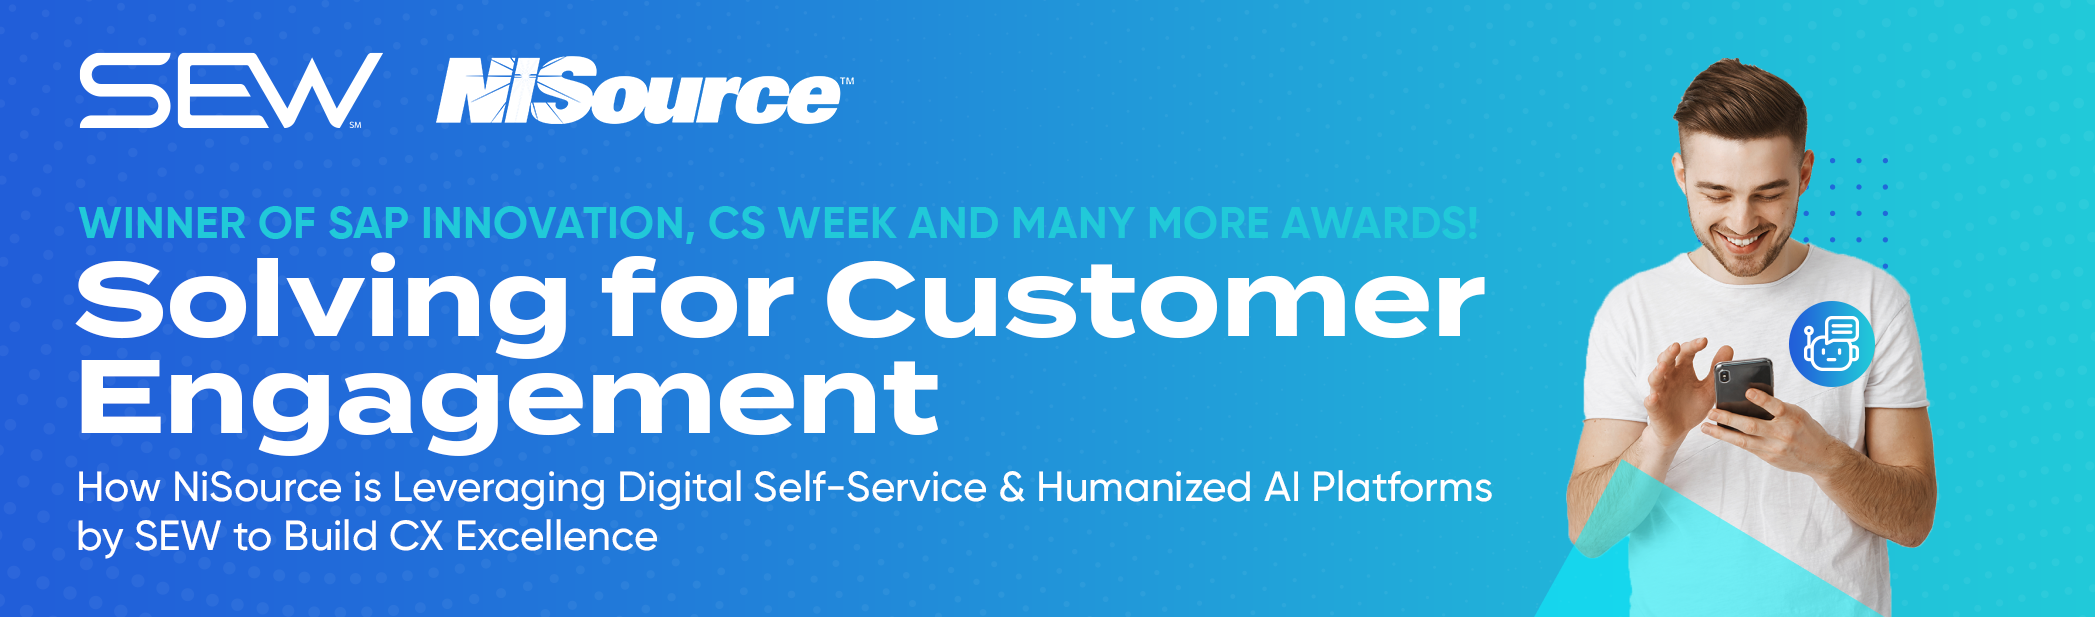 Solving for Customer Engagement: How NiSource is Leveraging Digital Self-Service & Humanized AI Platforms by SEW to Build CX Excellence